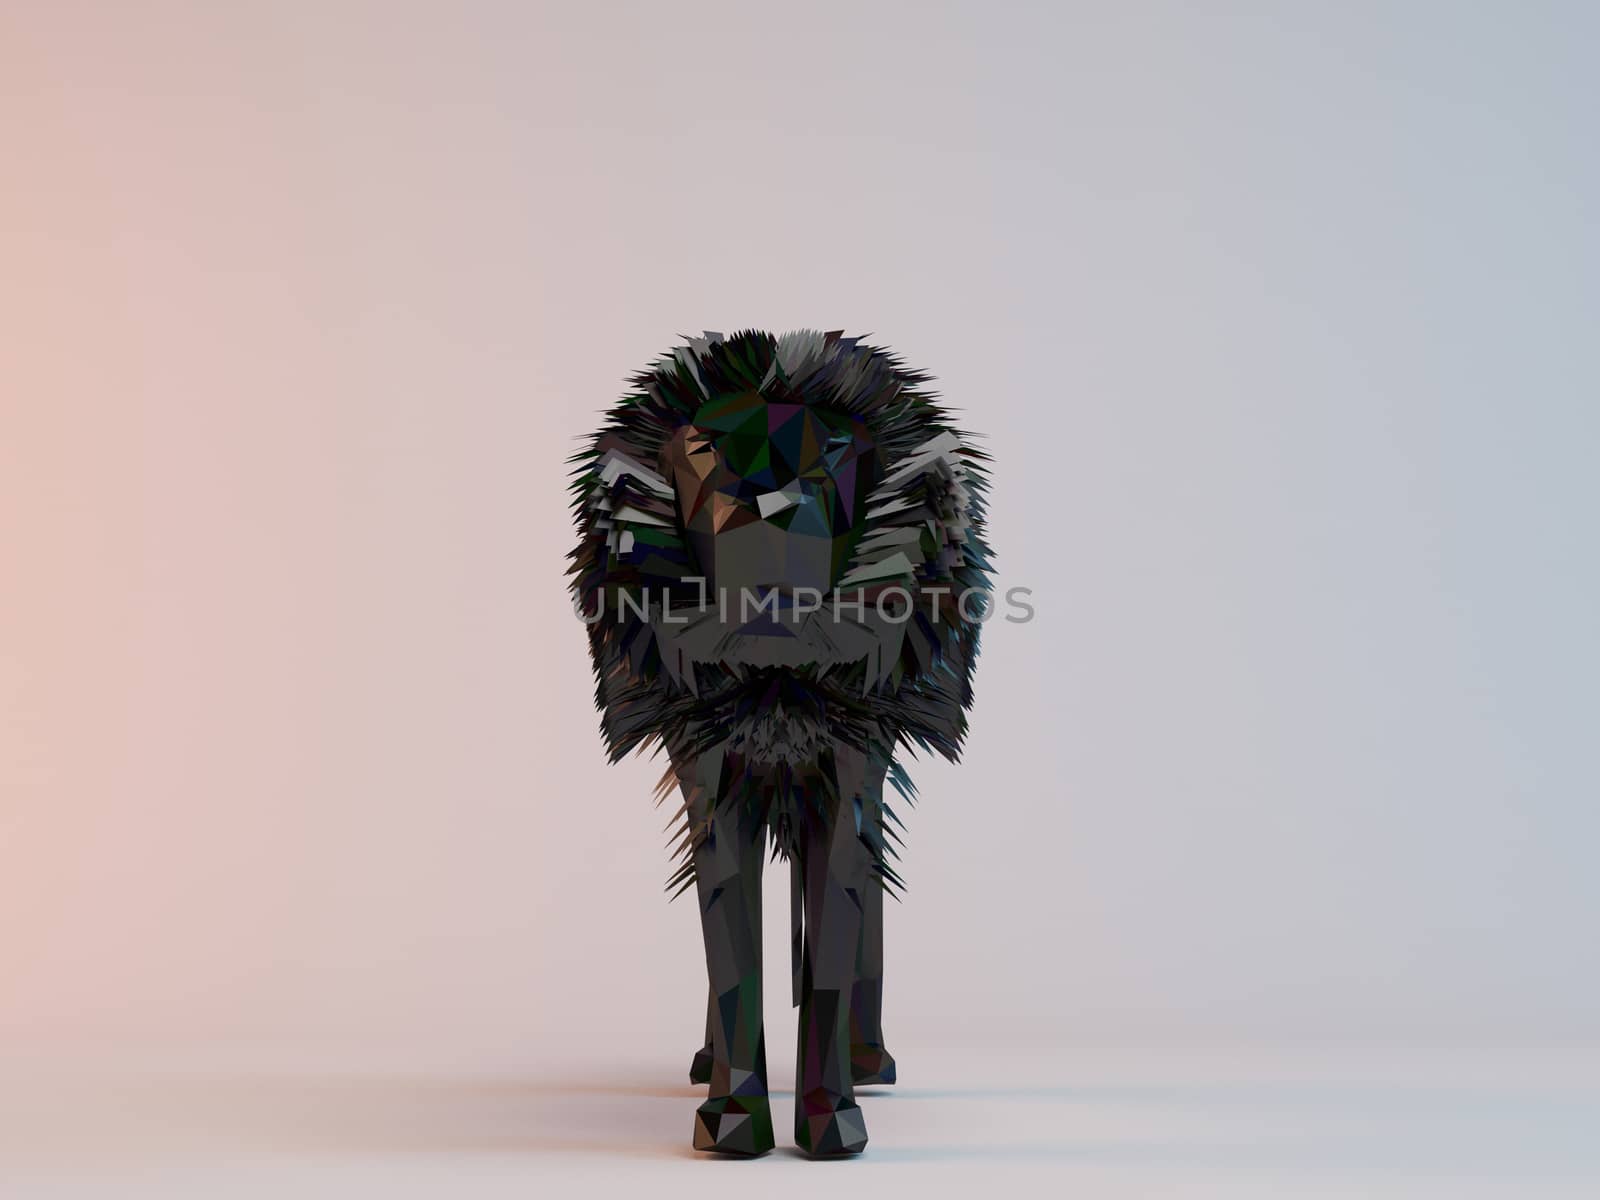 3D black low poly (Lion) inside a white stage with high render quality to be used as a logo, medal, symbol, shape, emblem, icon, children story, or any other use.